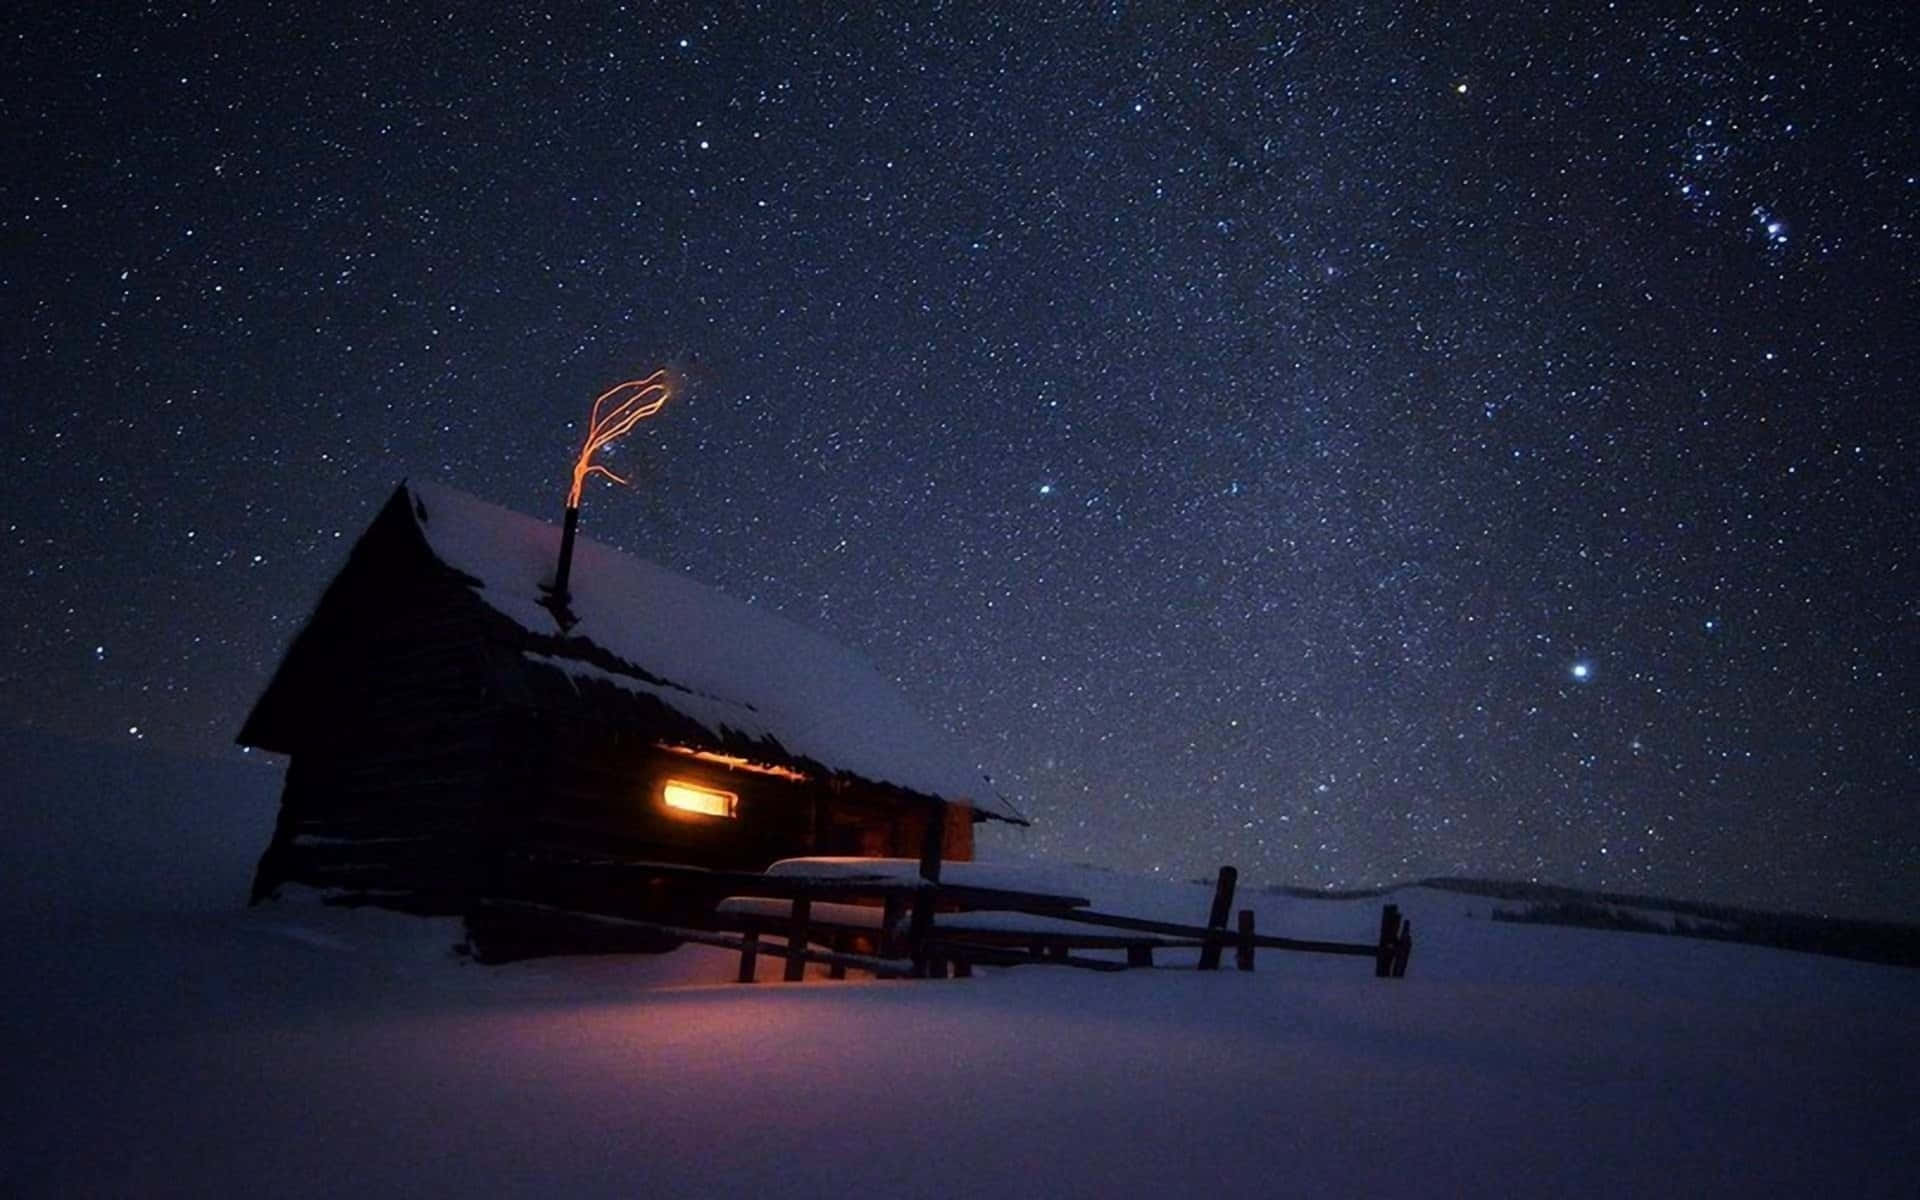 A Small Cabin Under The Stars In The Snow Wallpaper